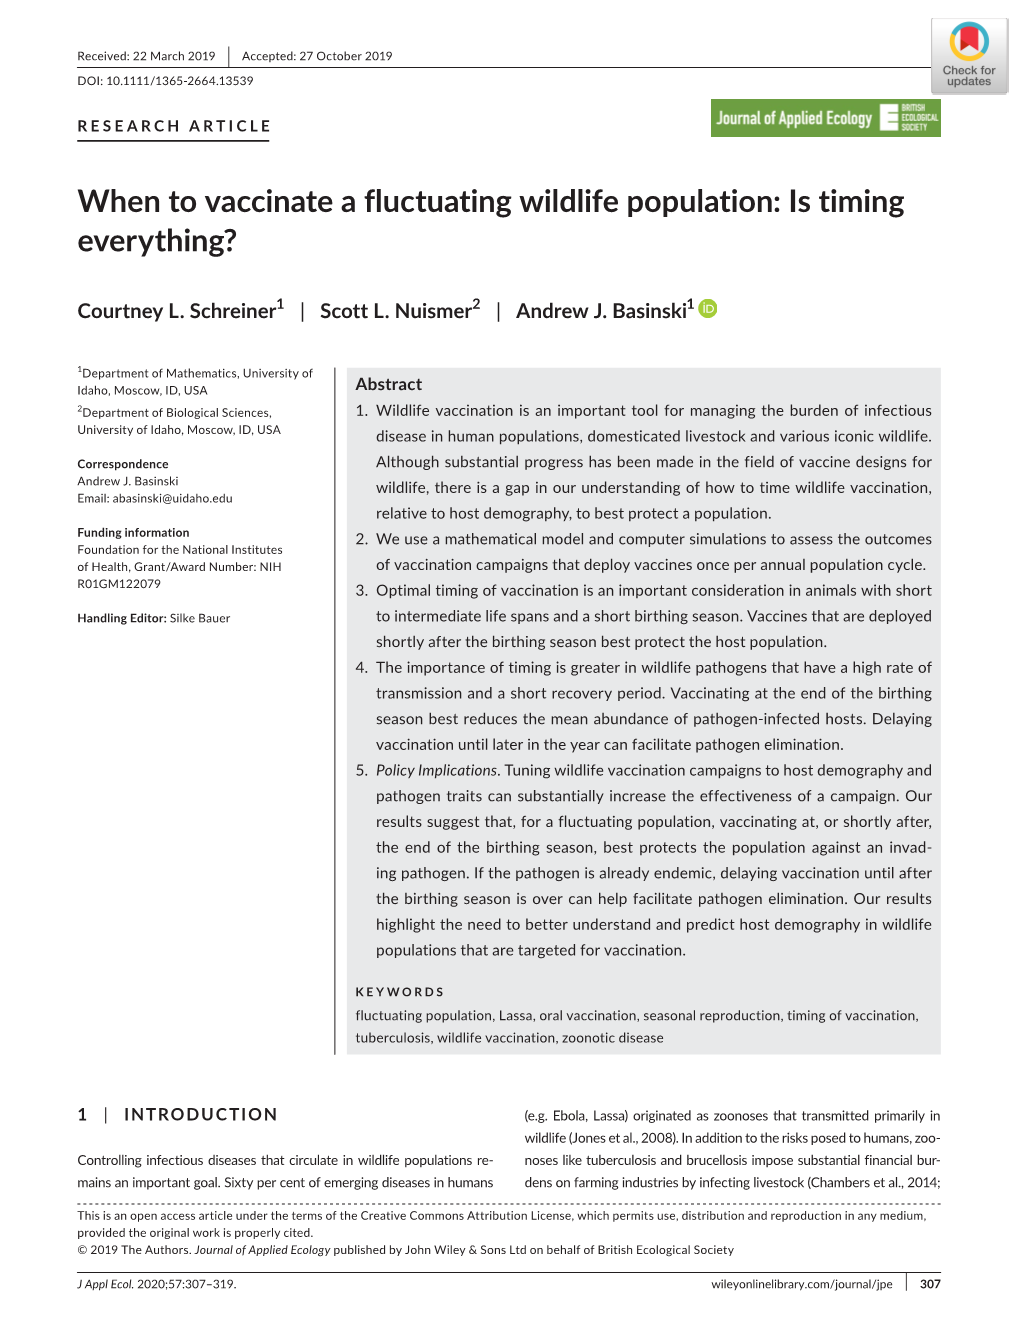 When to Vaccinate a Fluctuating Wildlife Population: Is Timing Everything?